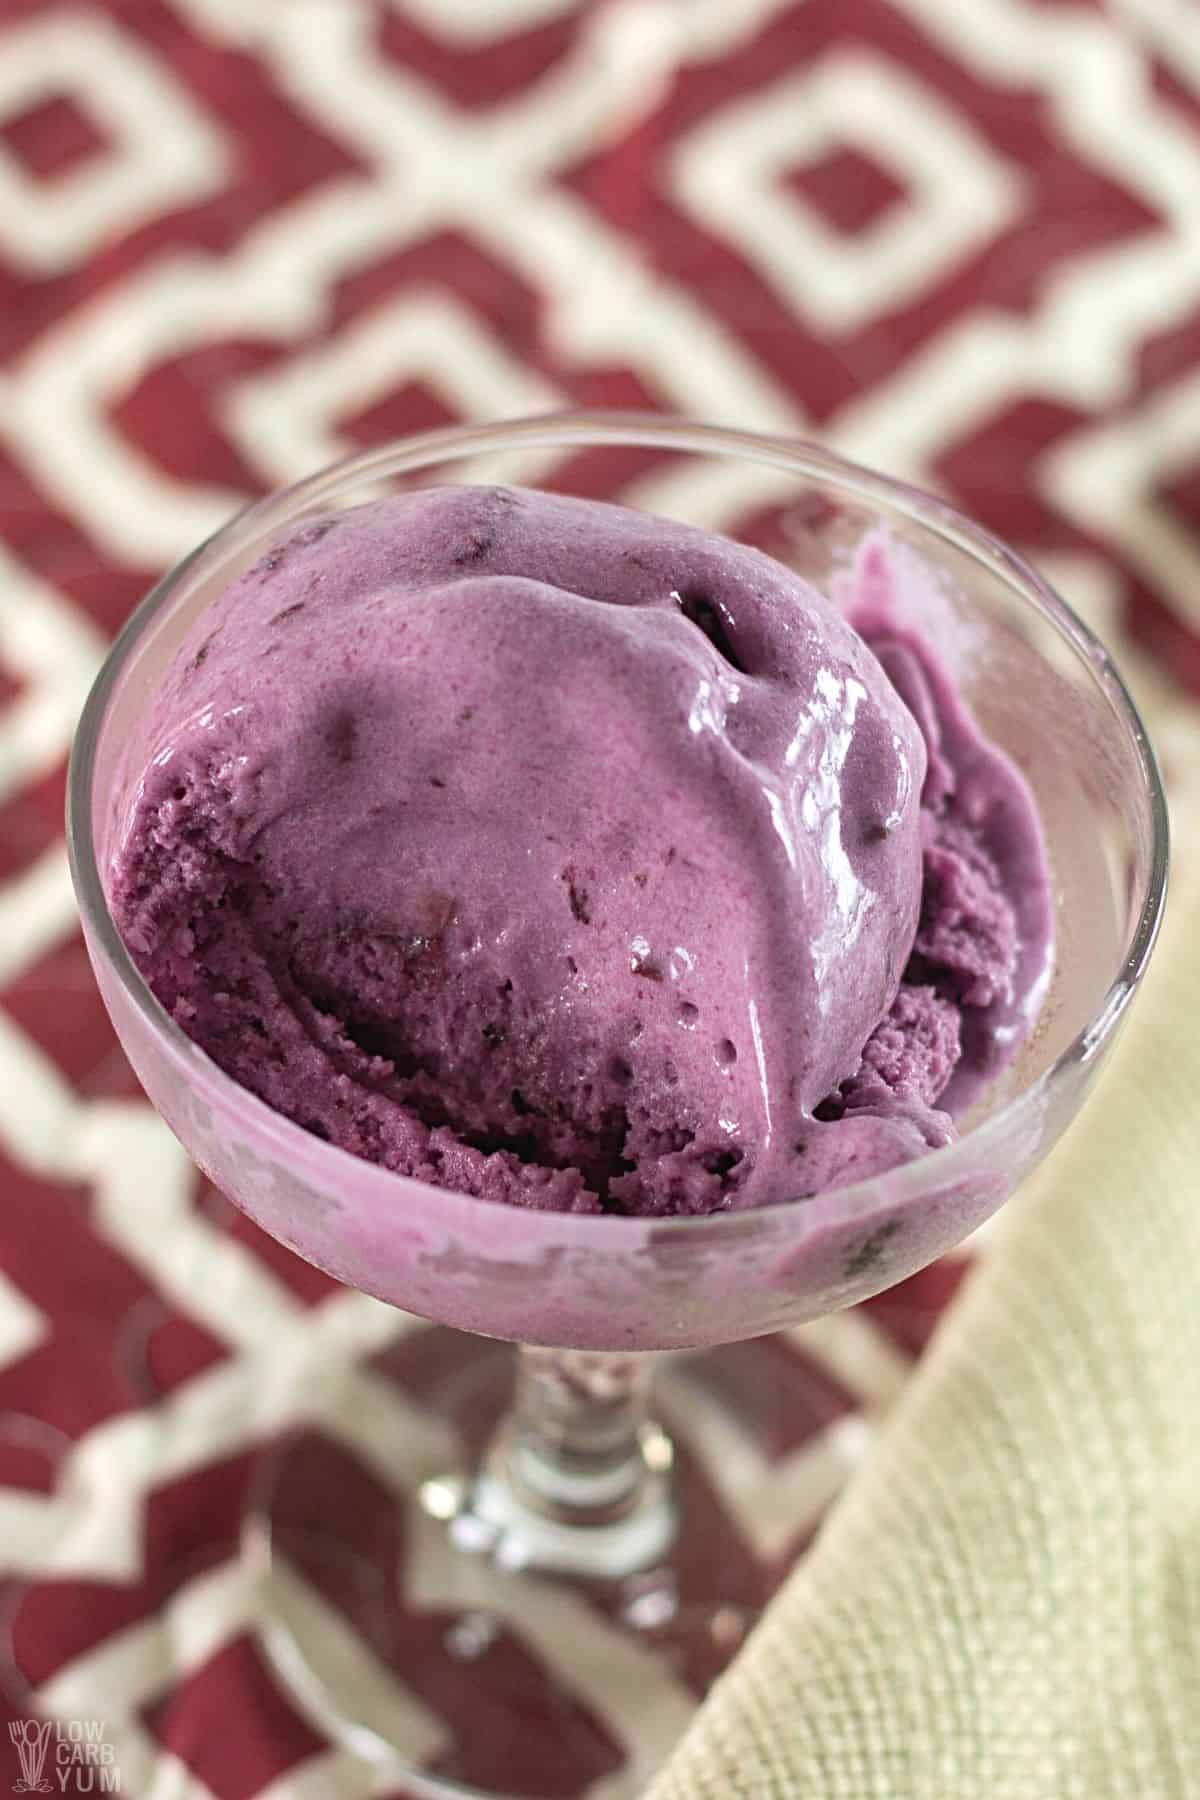 scoop of blueberry ice cream in dessert dish with spoonful missing.